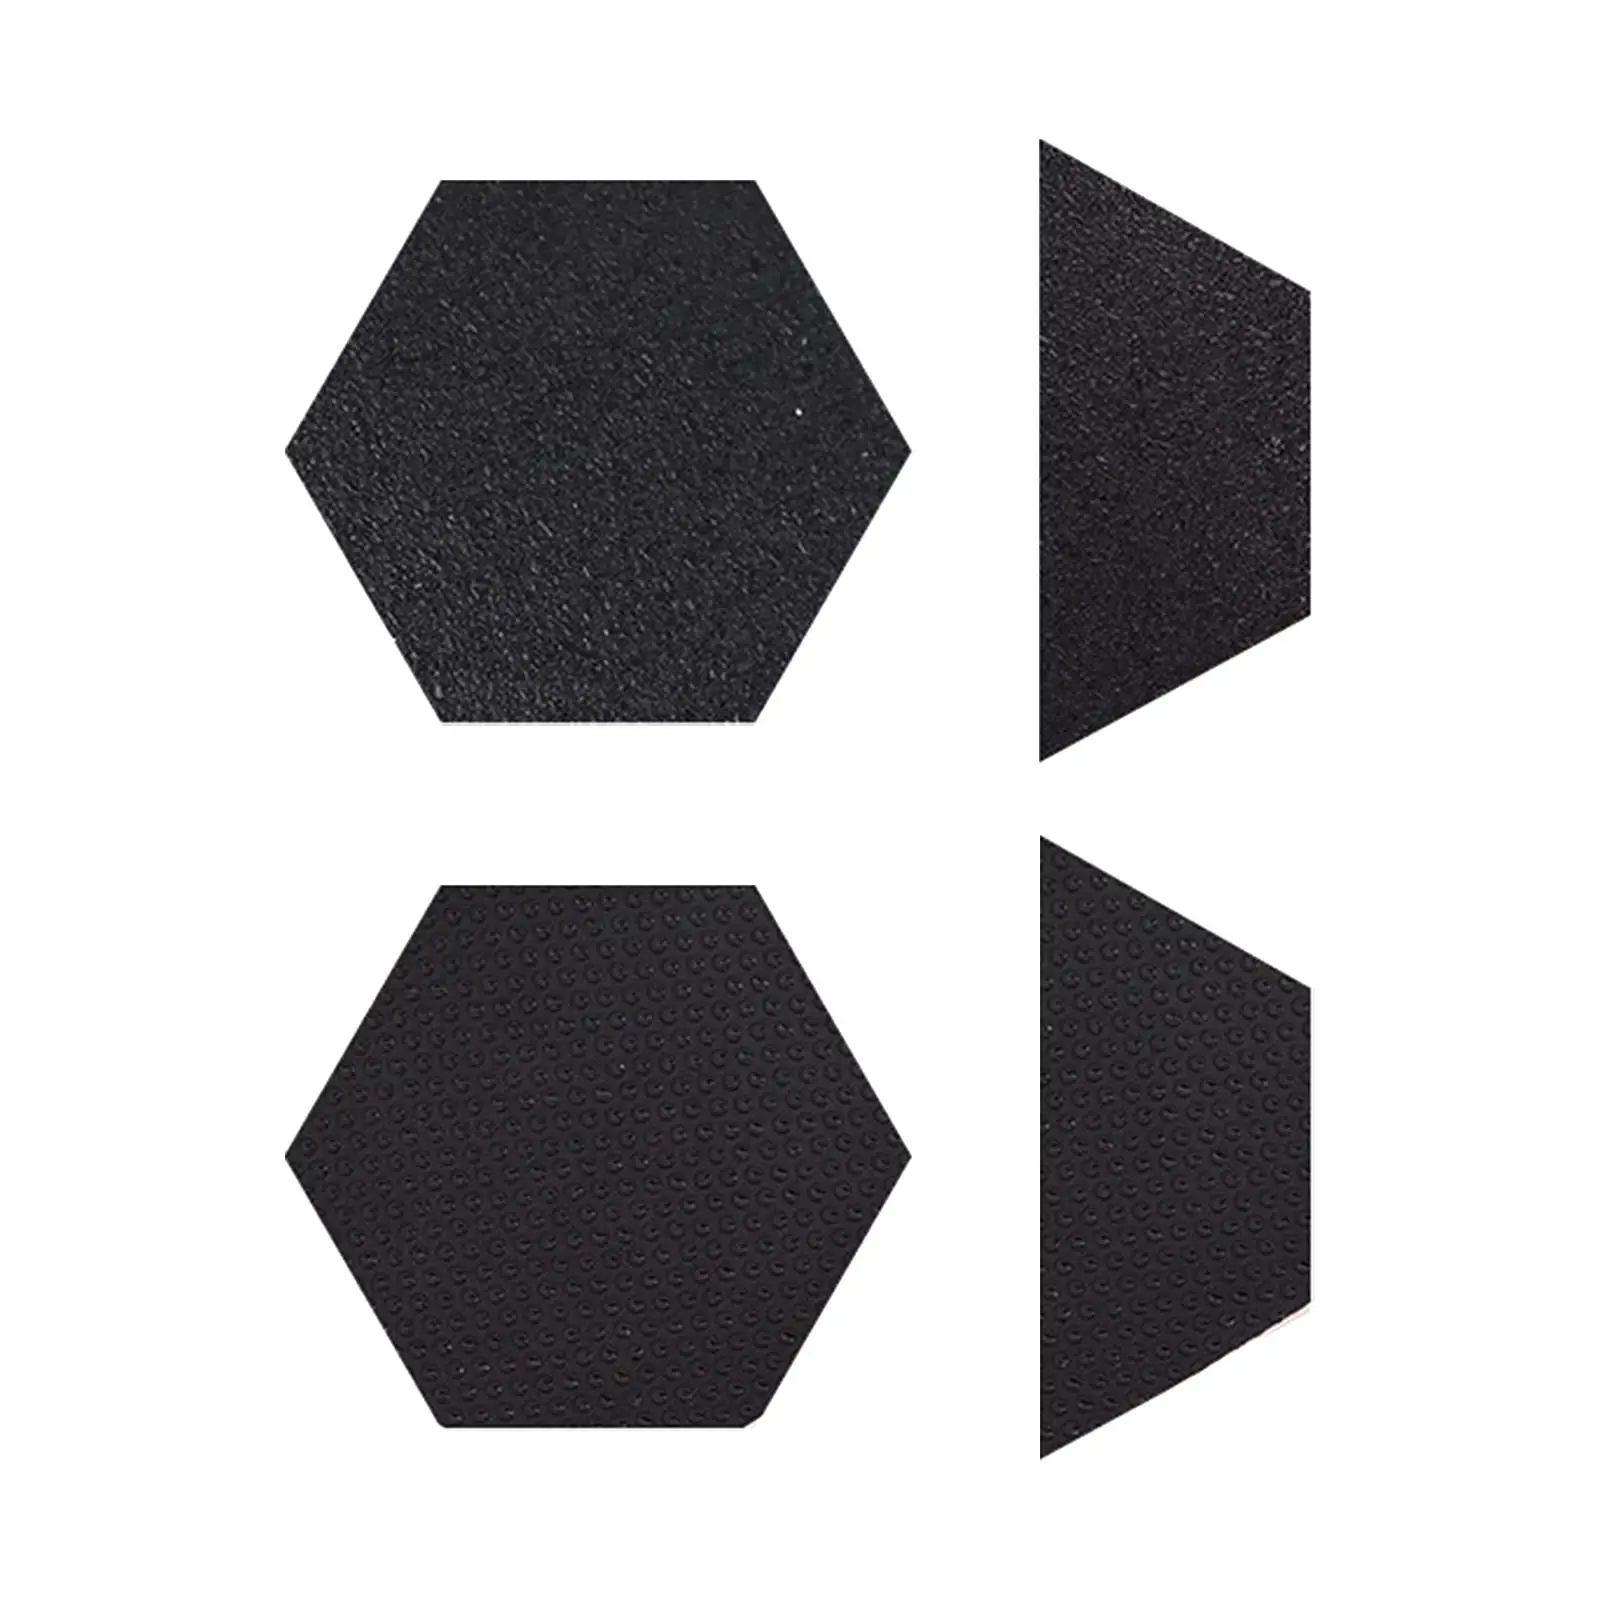 

Hexagon Surfboard Traction Pads Surfing Padding Surfpad Waxless for Kiteboards Fish Board Water Sports Skimboarding Paddleboard